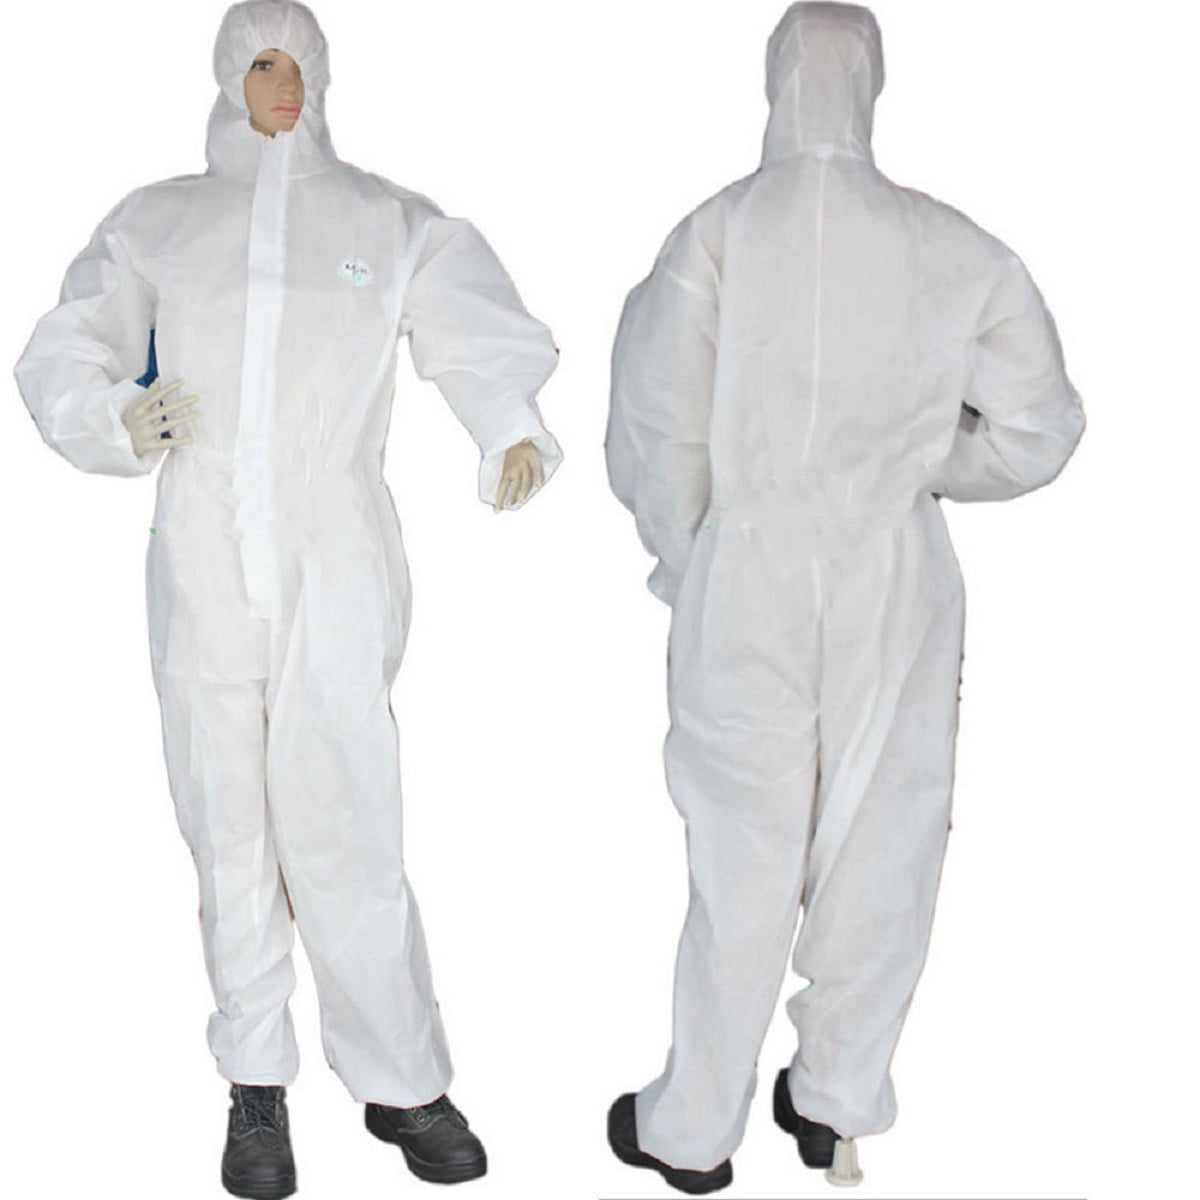 50xSPP White Disposable Coverall Ovrall Suits Painters Cleaners Labs Boiler Suit 